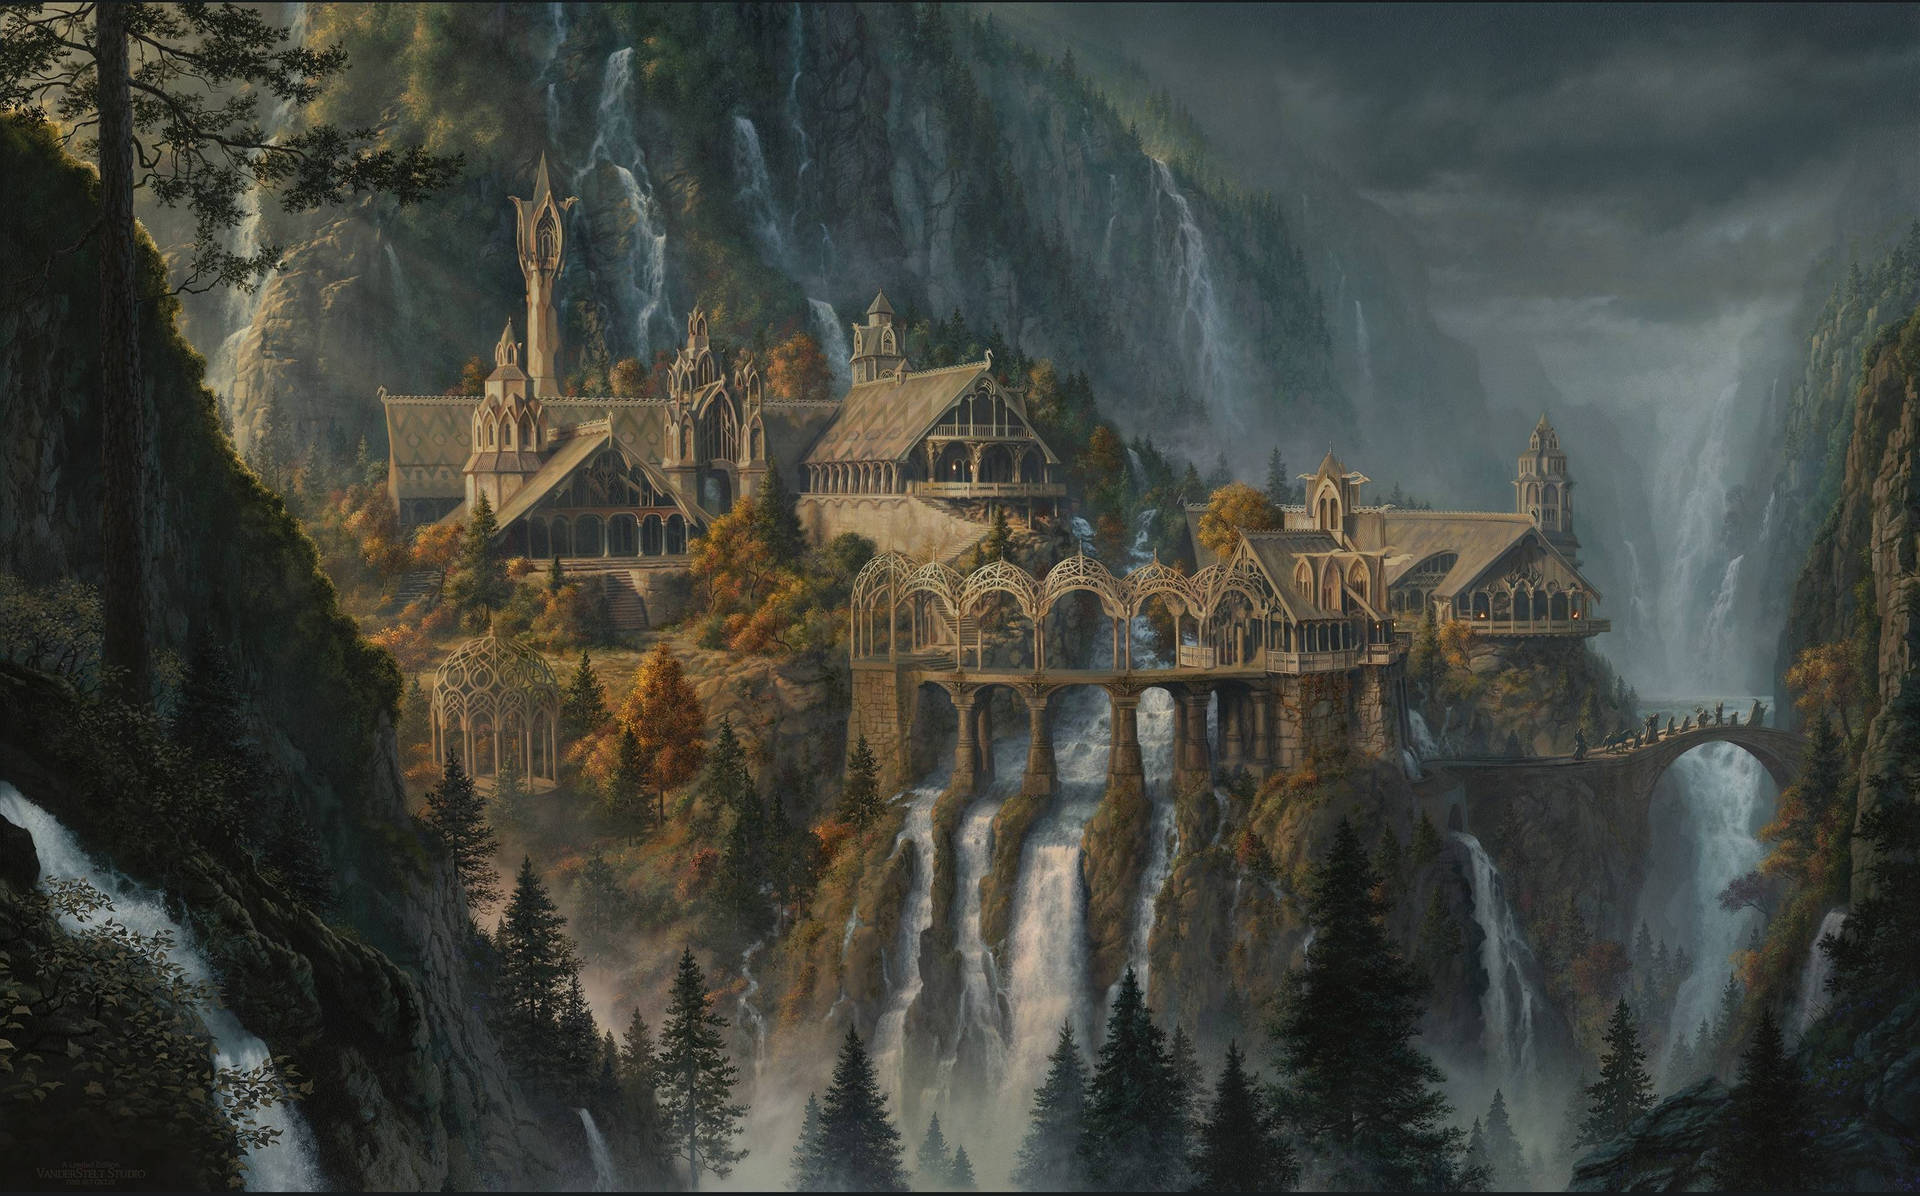 Rivendell Town Lotr Hd Background